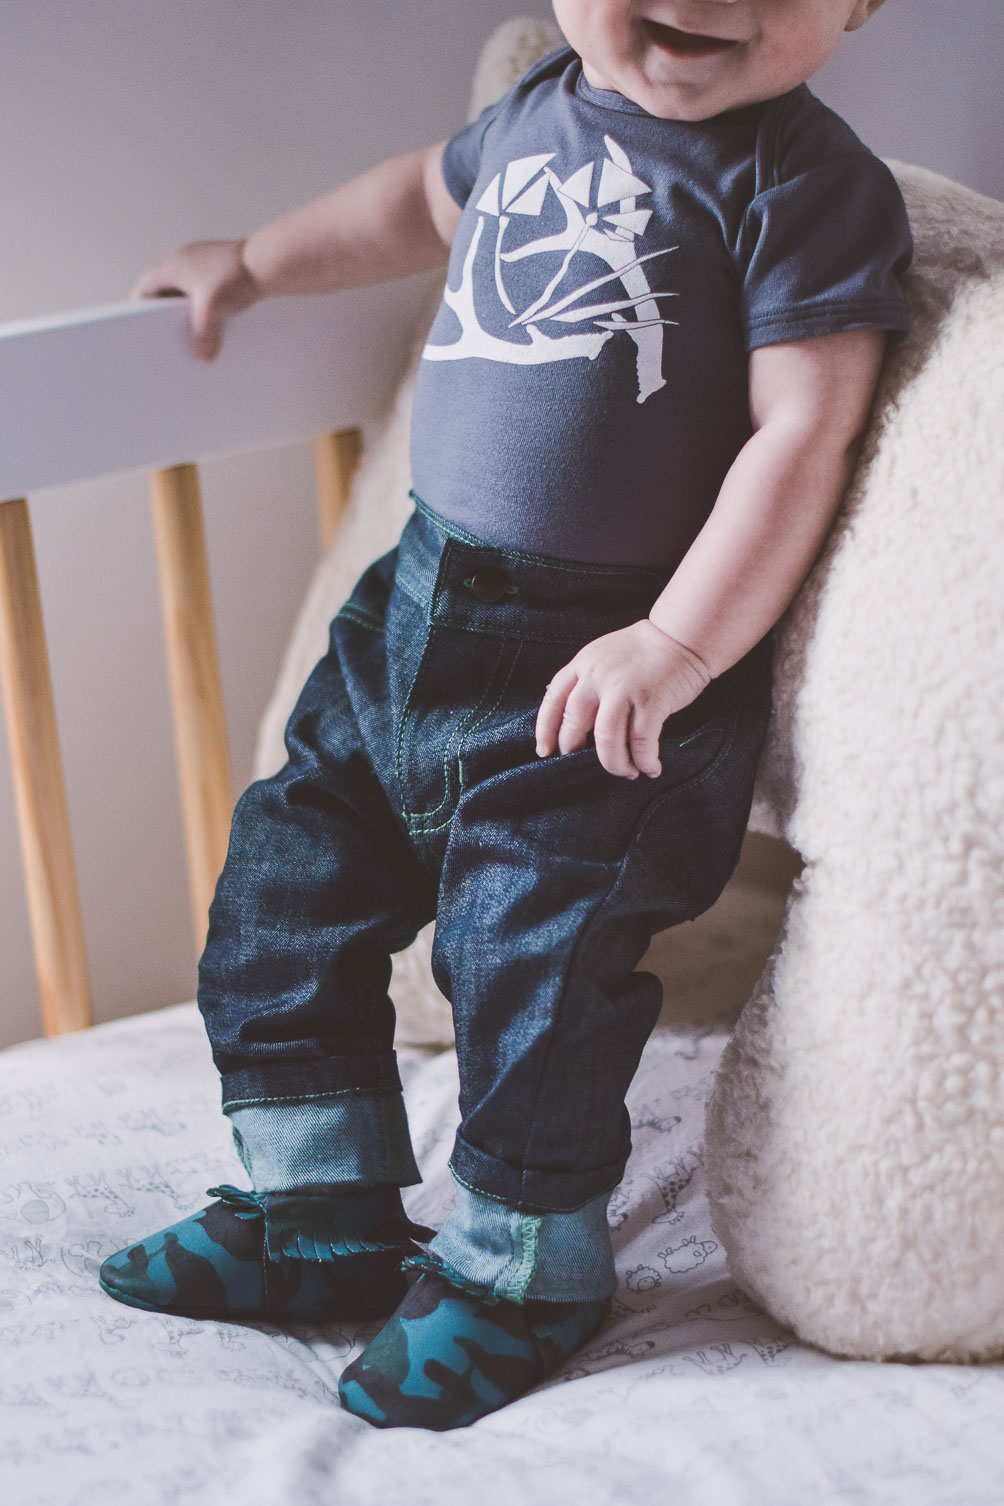 conscious consumer brand for ethical and sustainable baby clothes